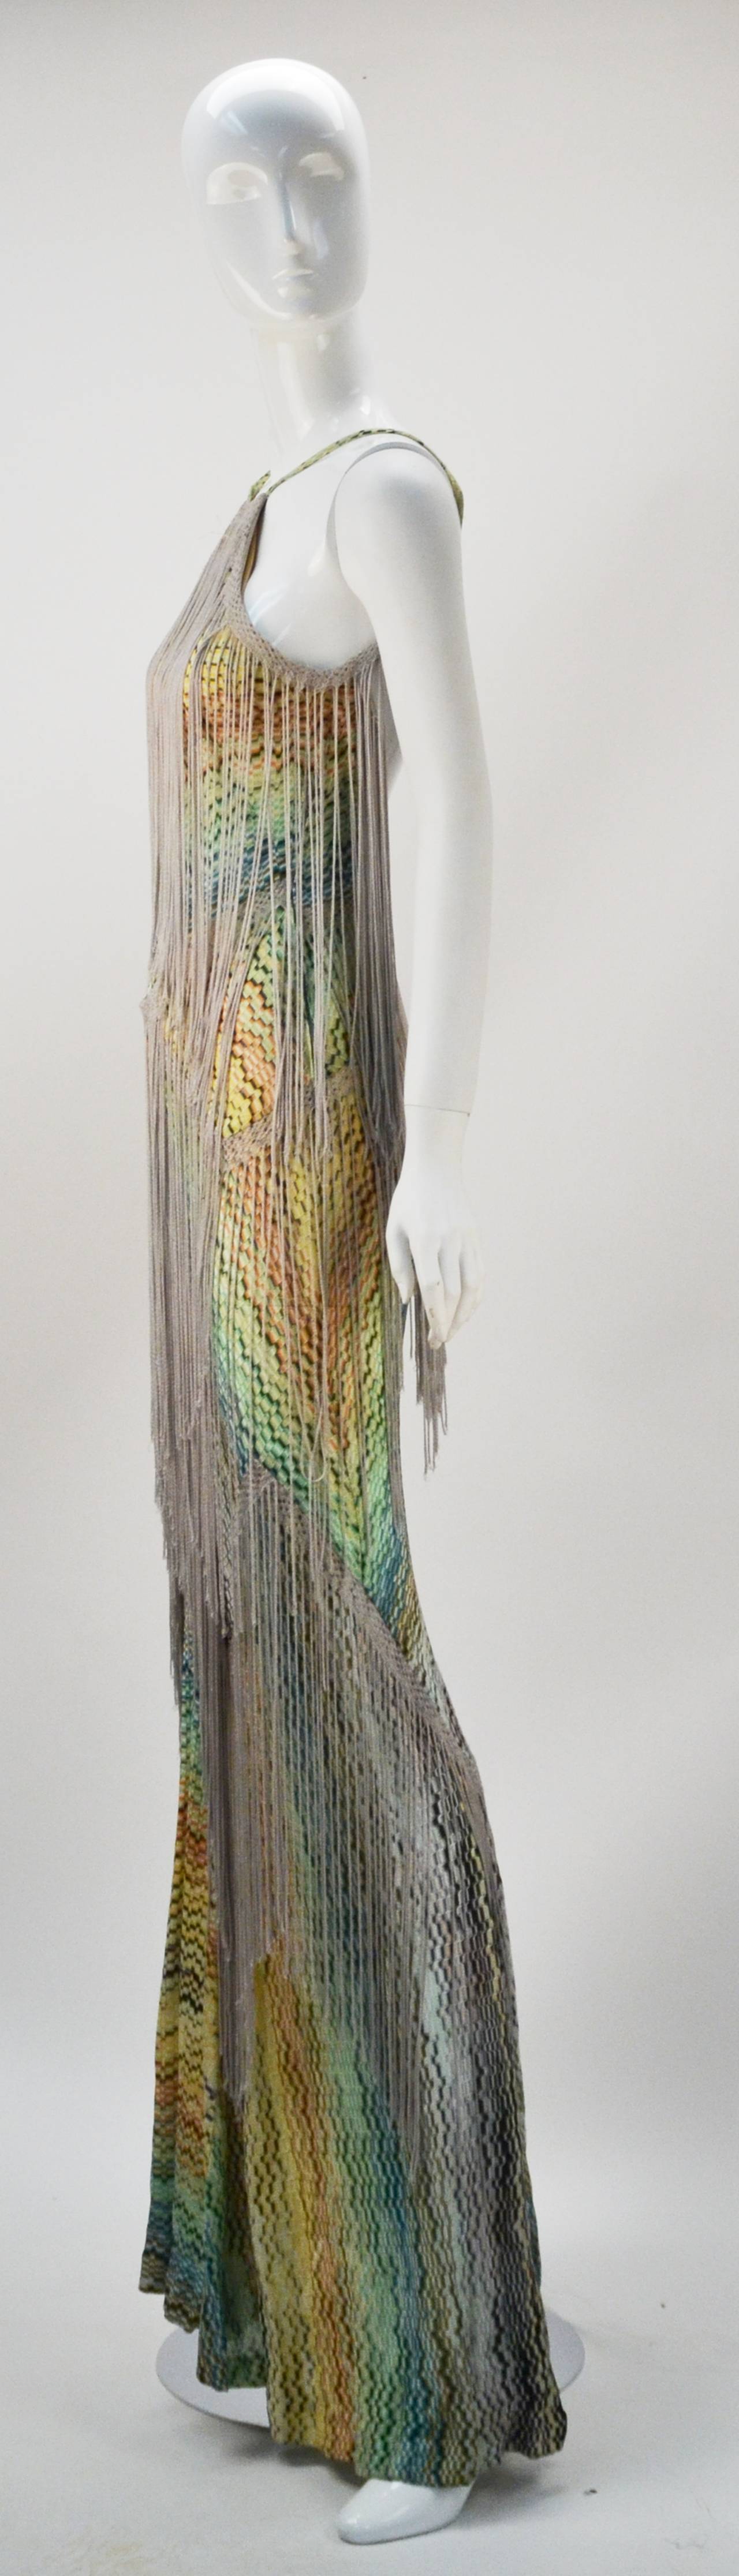 Iconic Missoni multi-color knit halter dress with exquisite fringe and crochet trim.  The bust of the dress is lined. There is a side zipper closure. The dress has a dramatic 71